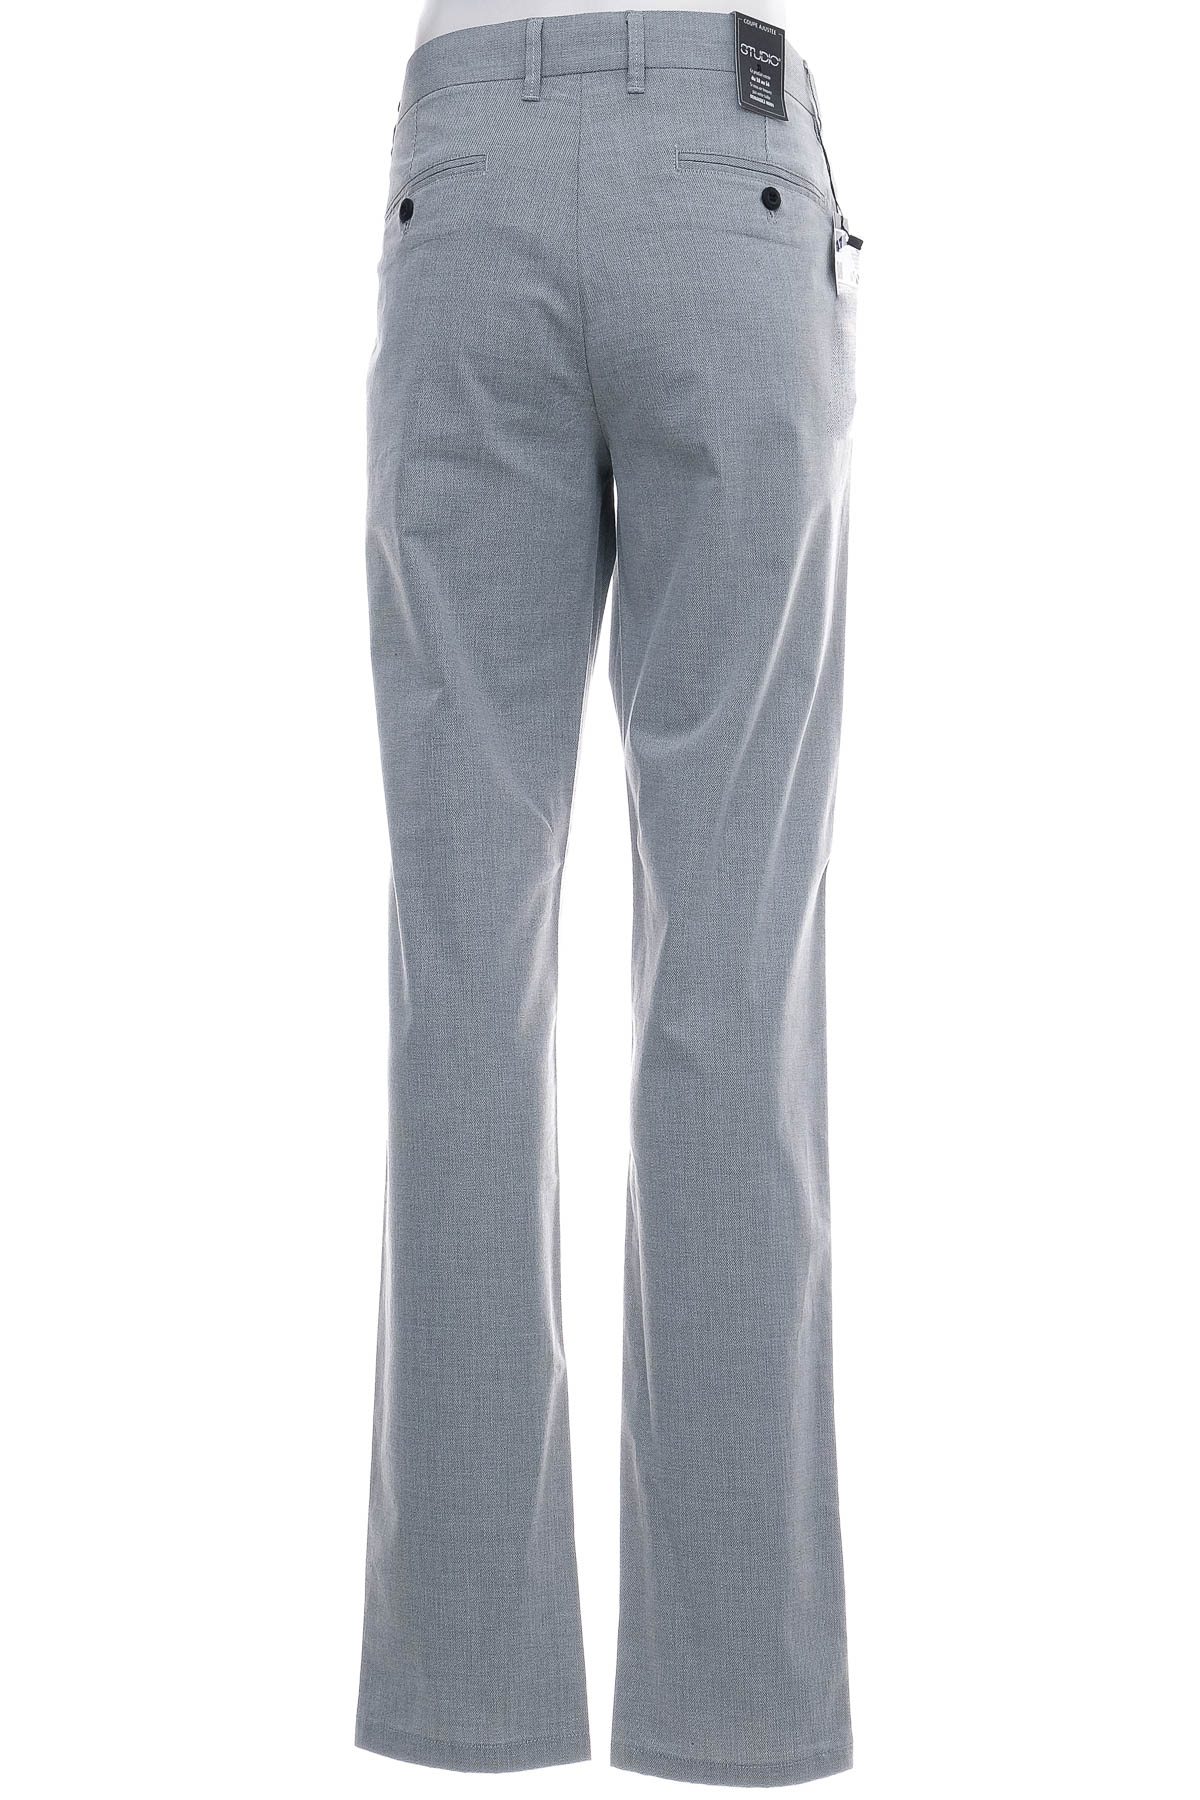 Men's trousers - Armand Thiery - 1